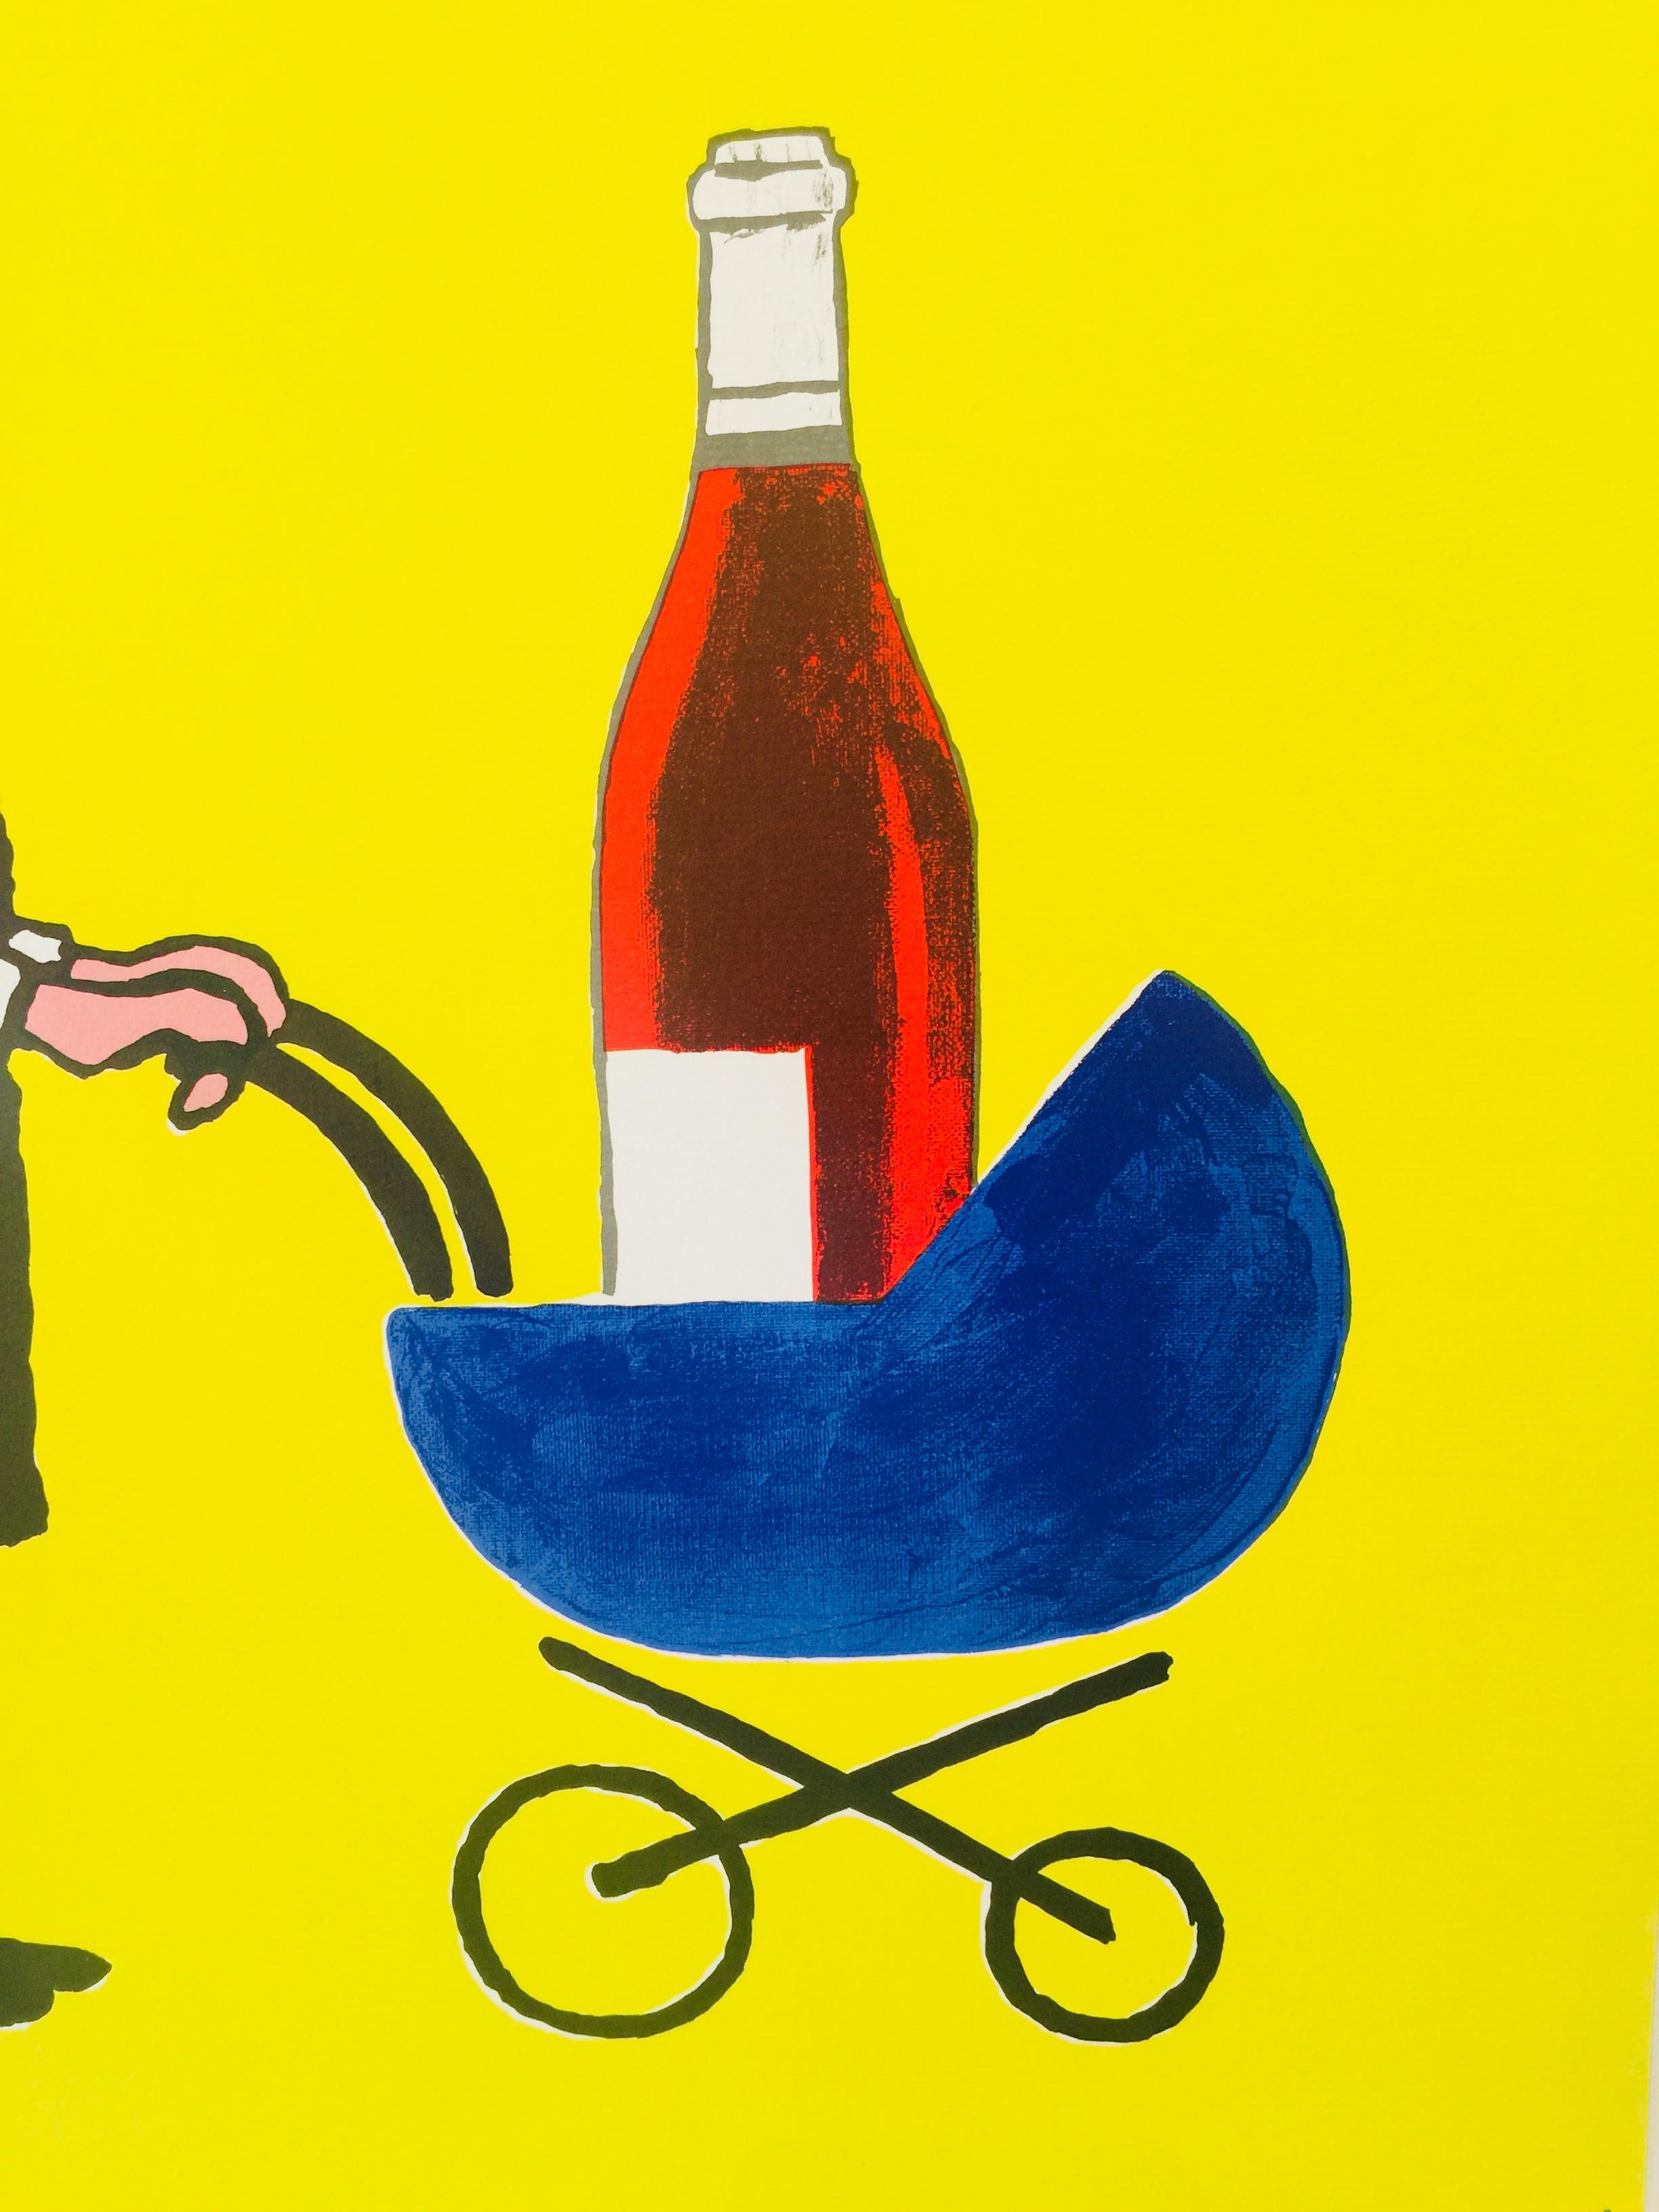 french wine posters